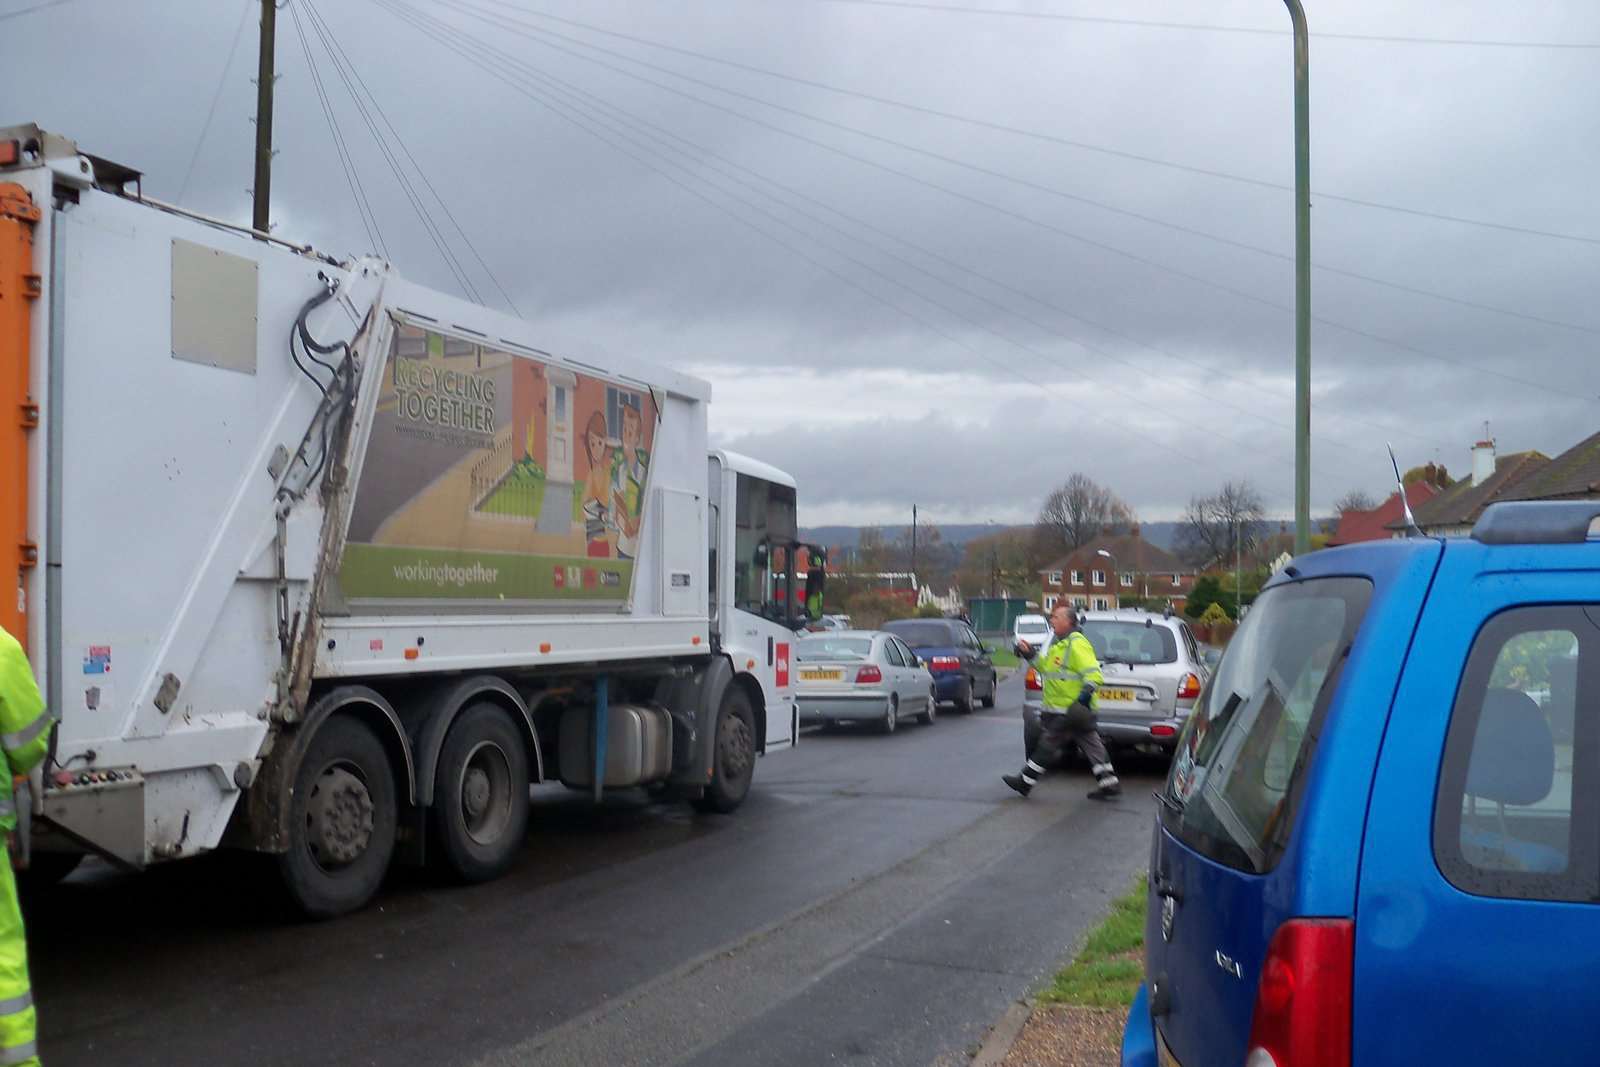 The refuse lorry couldn't pass the parked cars